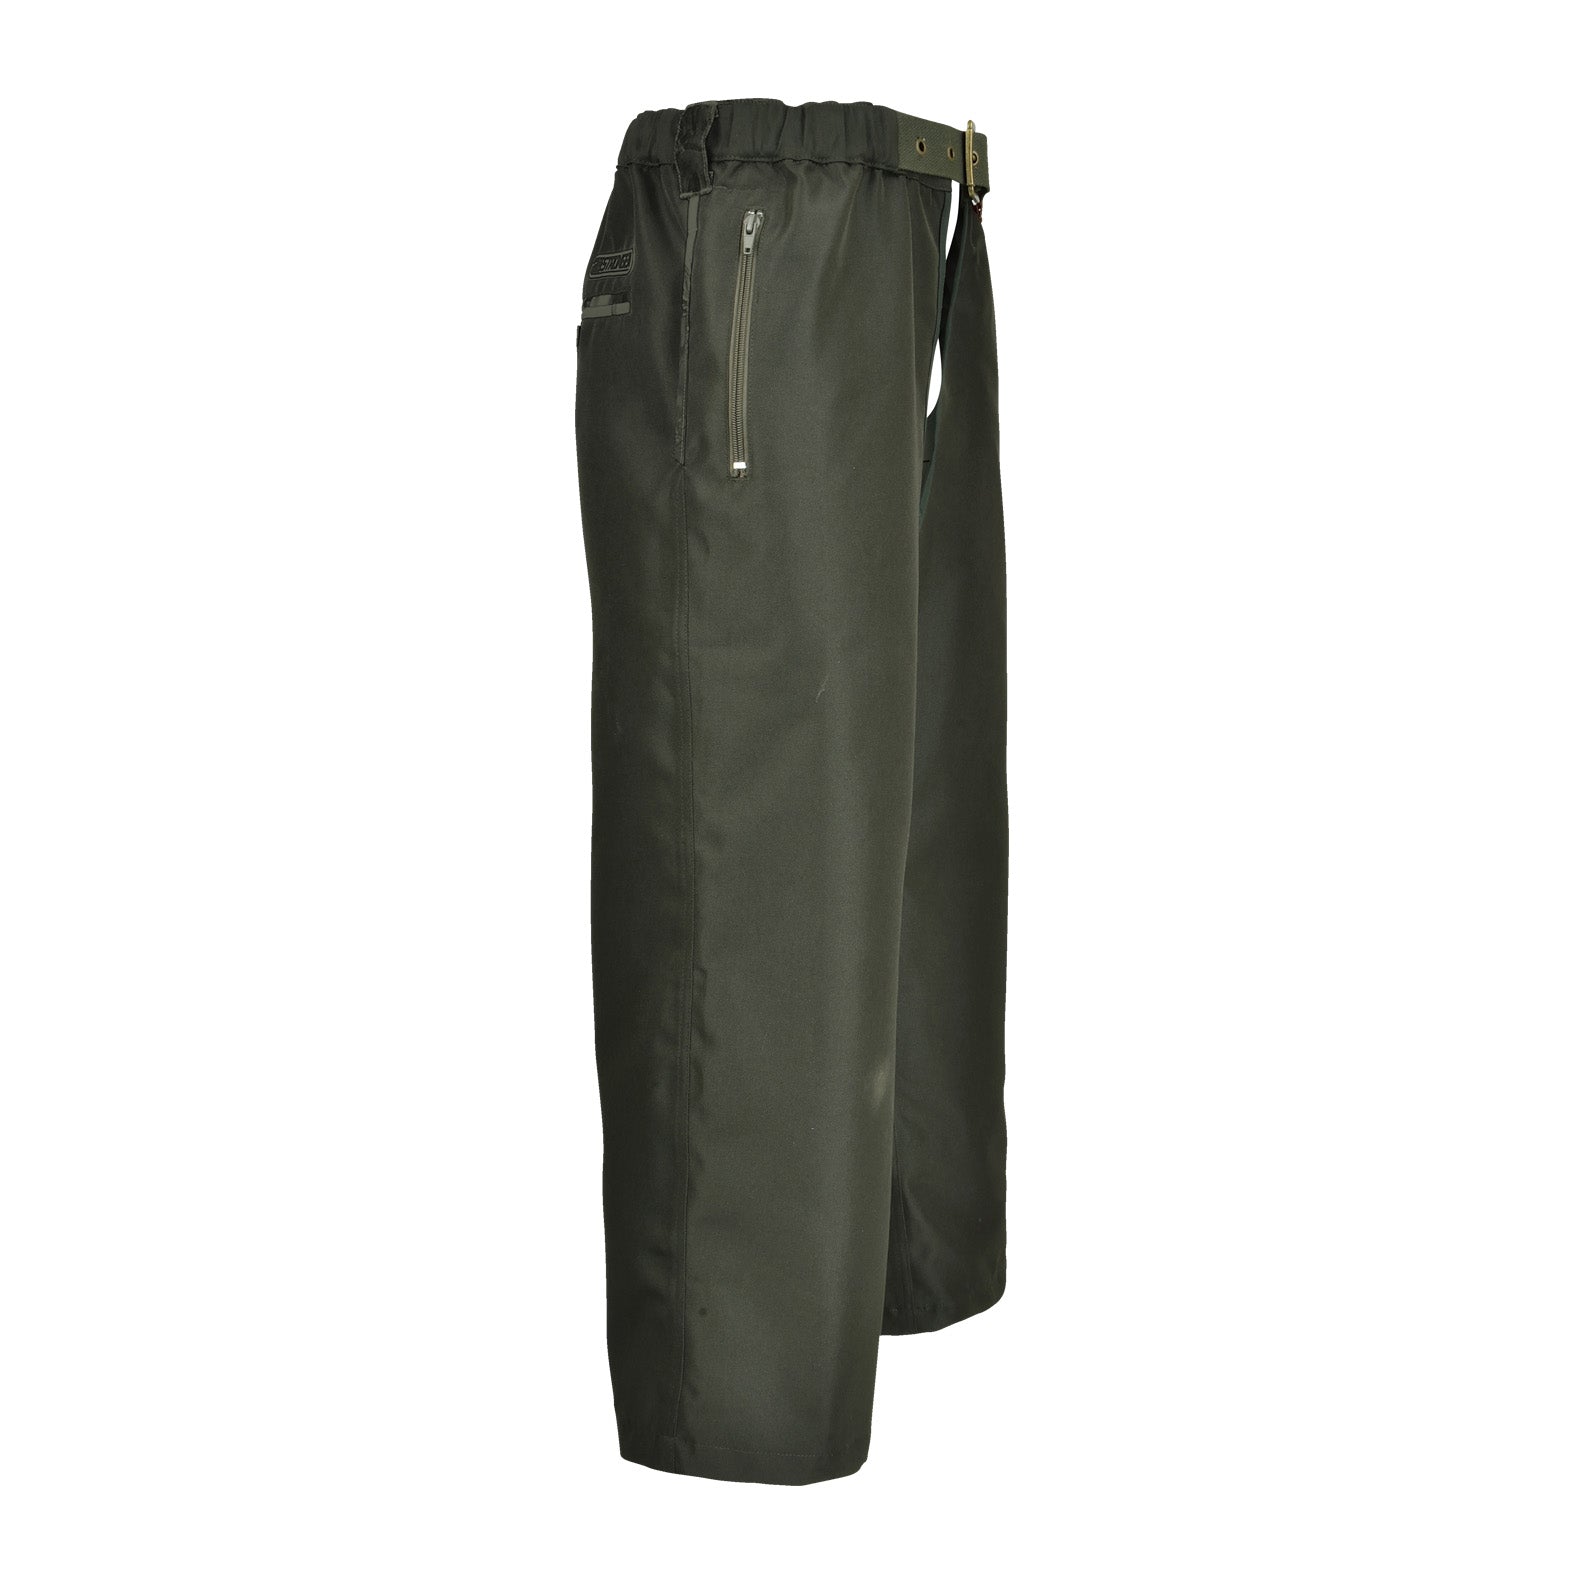 Loose Fit Waterproof Trekking Overtrousers | Craghoppers | M&S